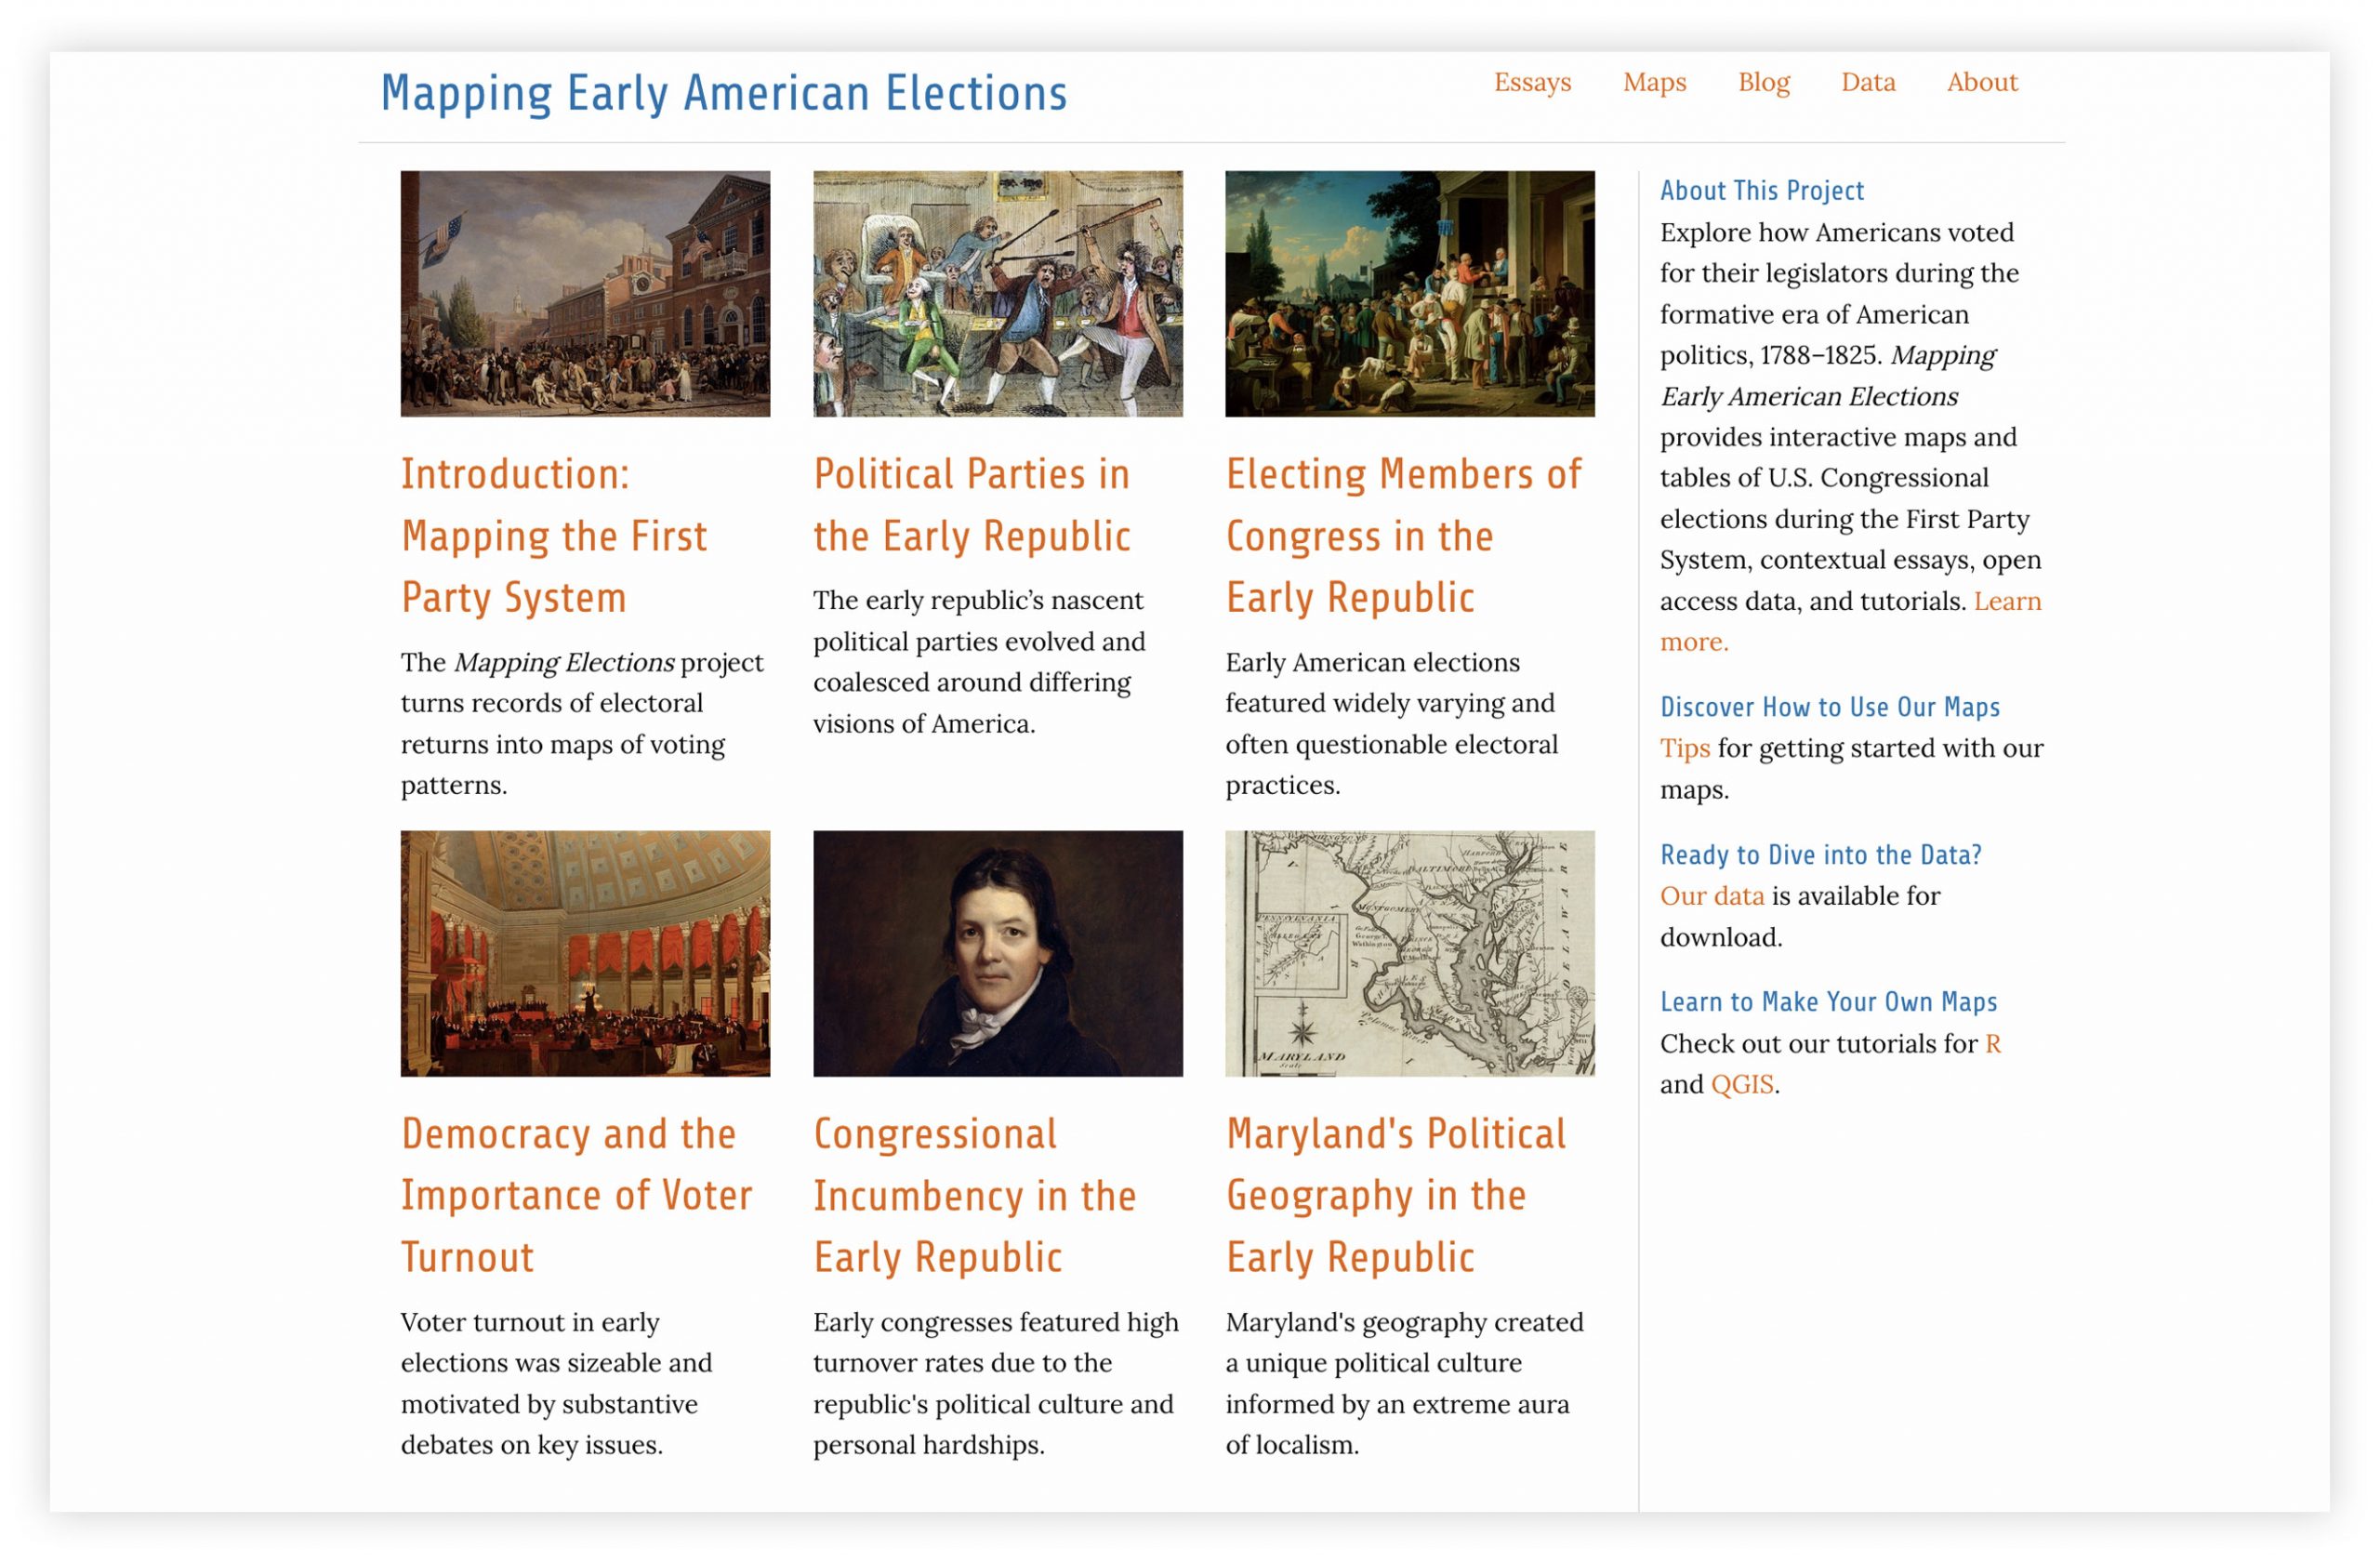 Screengrab of the Mapping Early American Elections website home page.